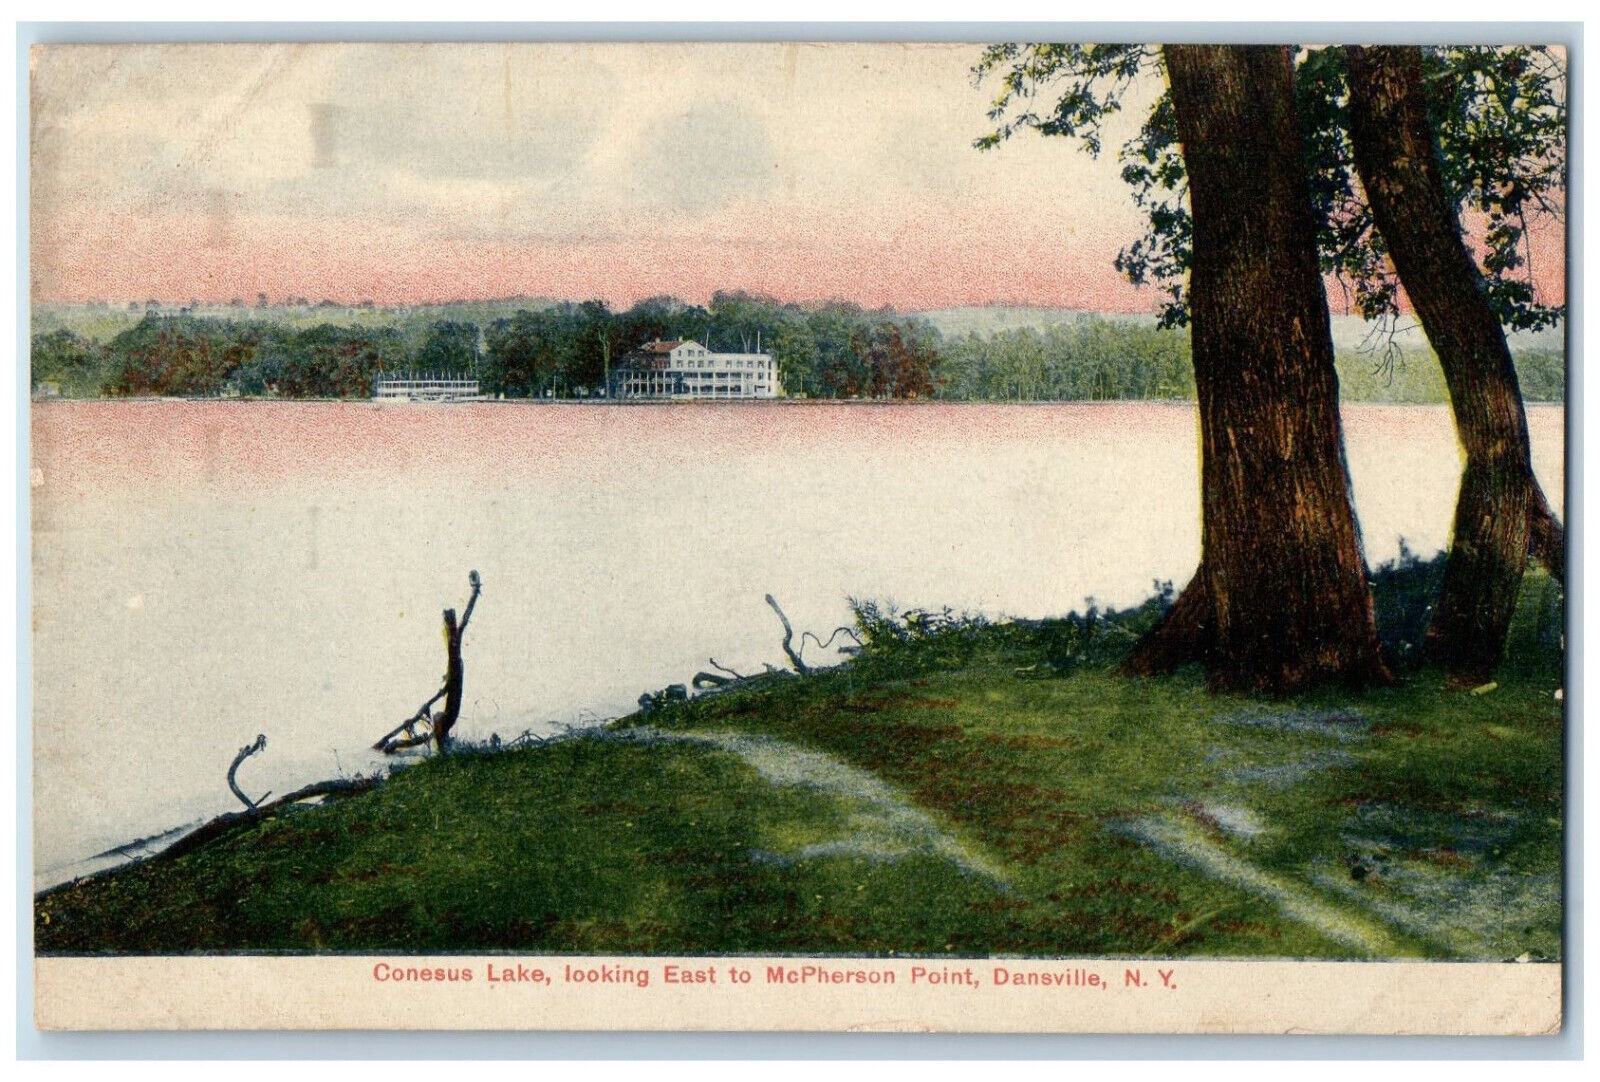 c1910 Conesus Lake Looking East to McPherson Point Dansville NY Postcard